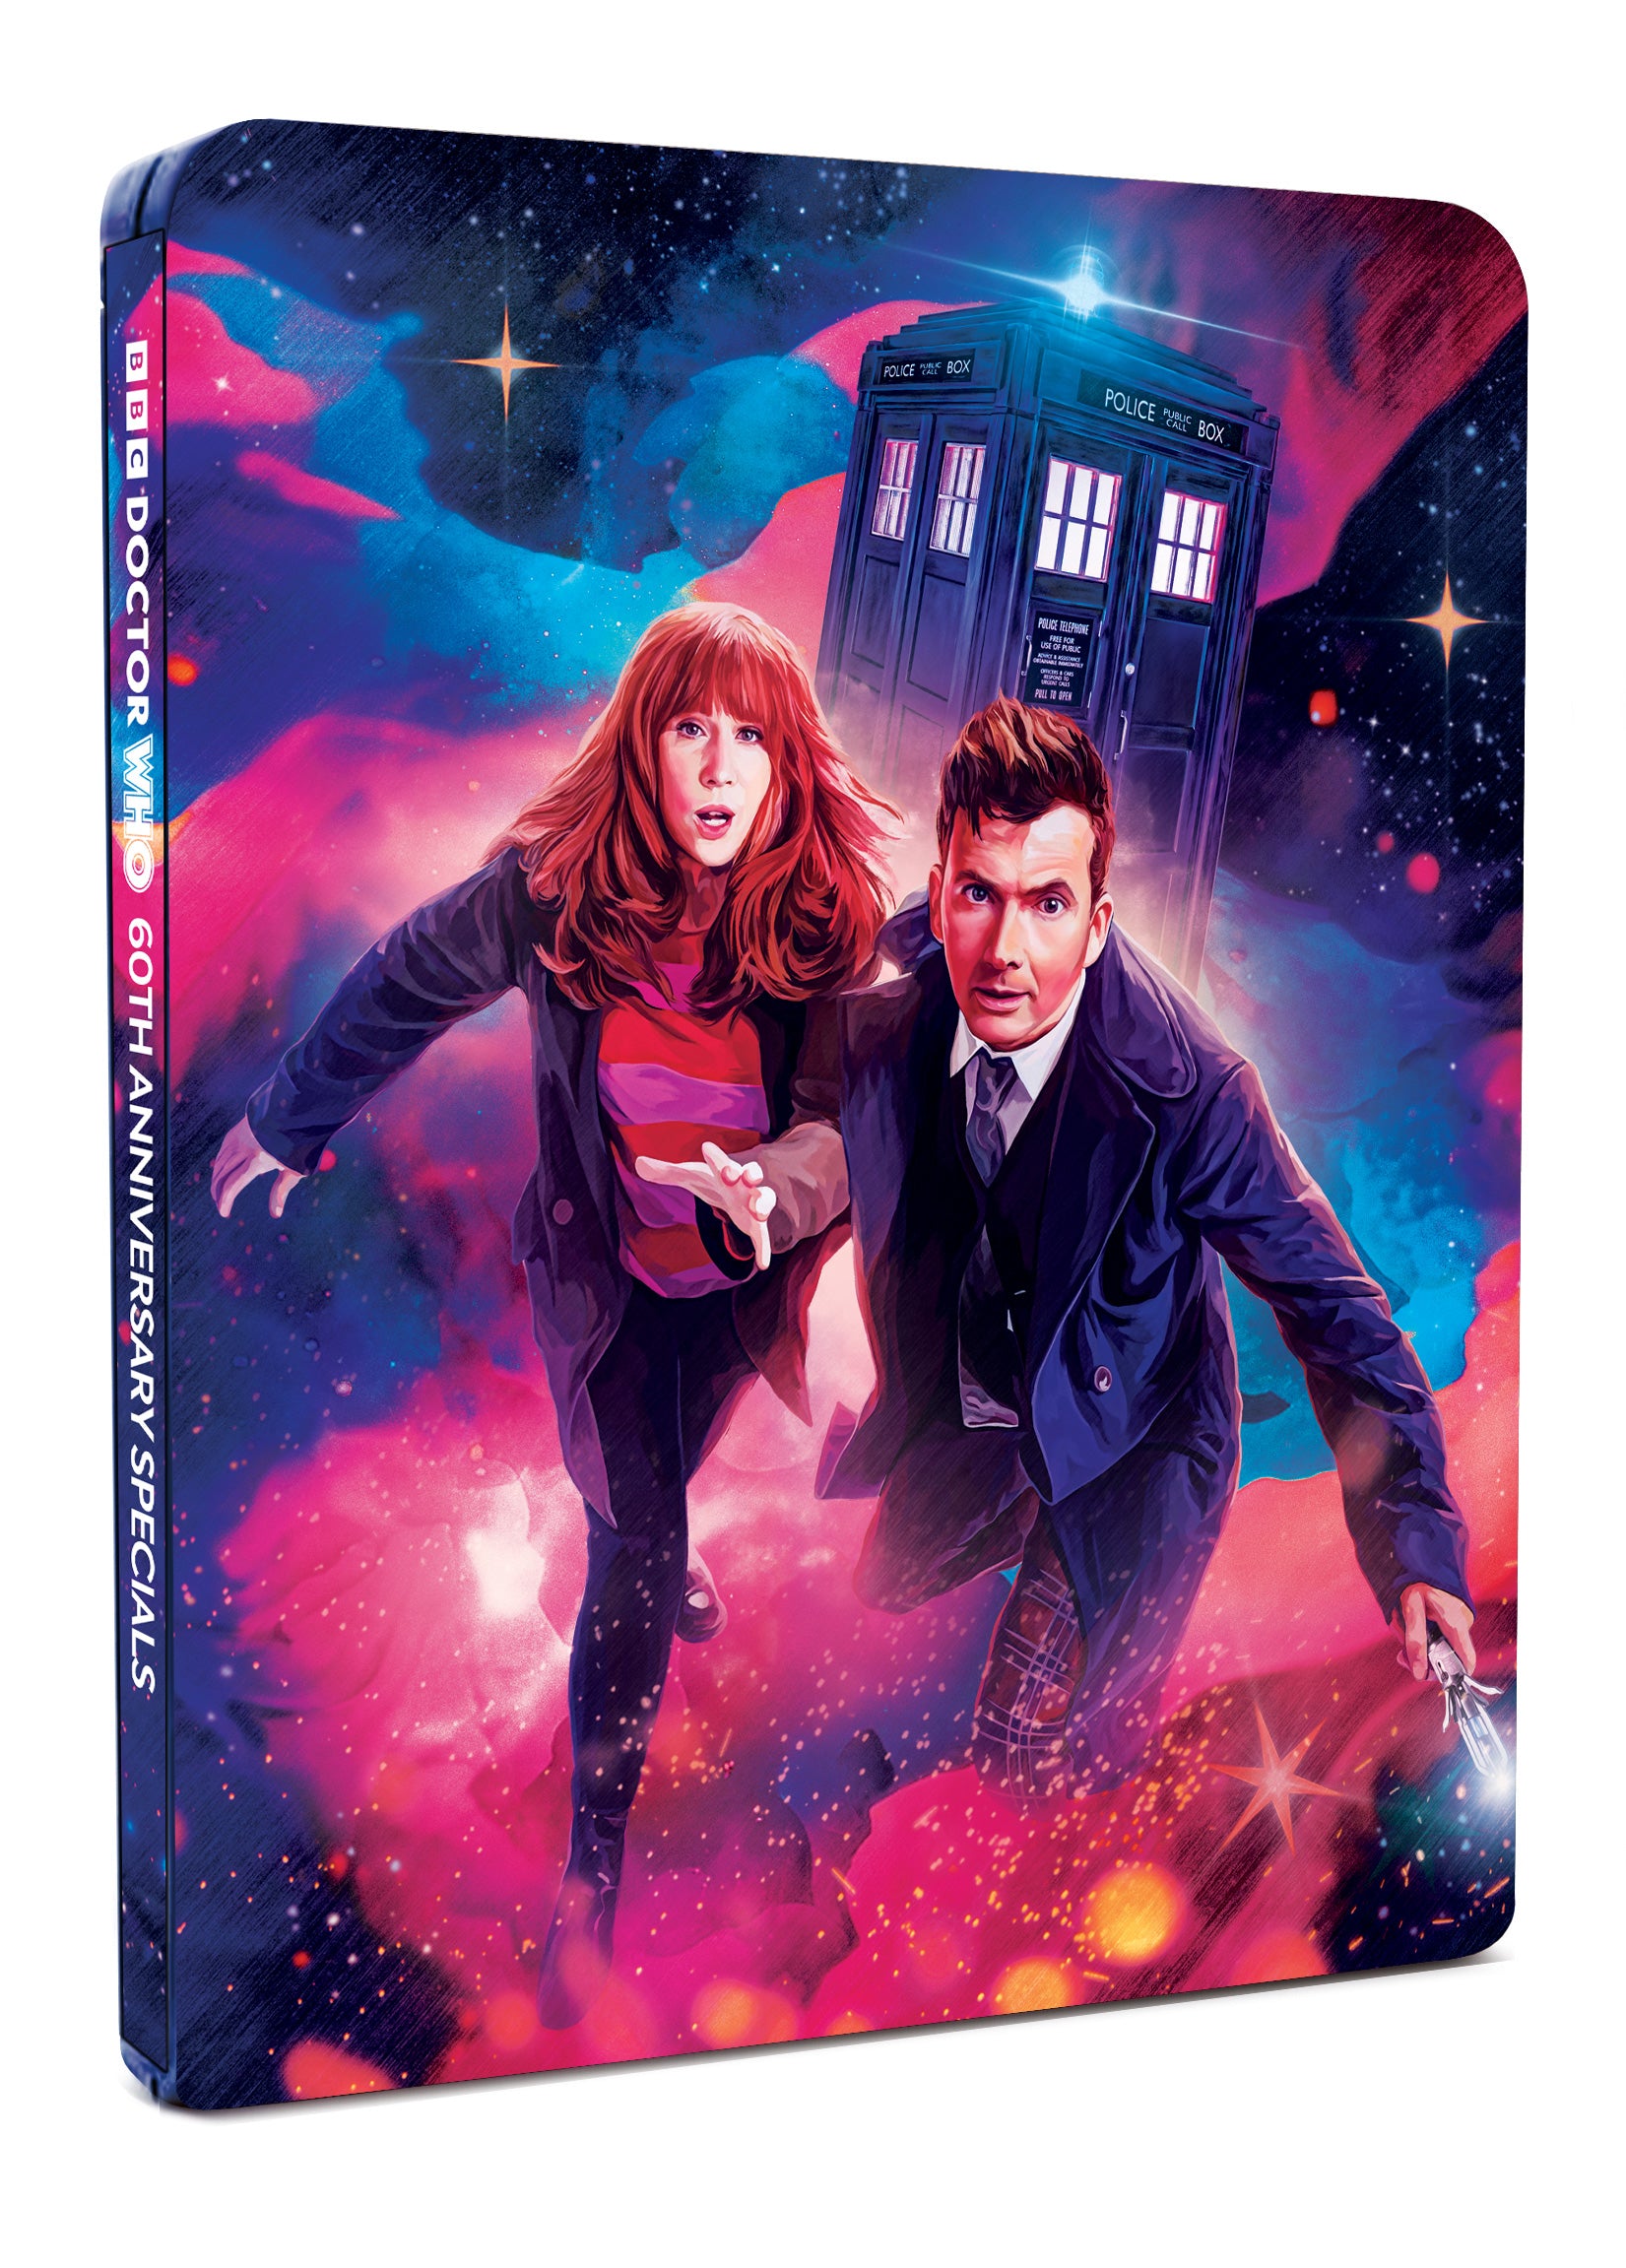 60th Anniversary Specials UK steelbook cover